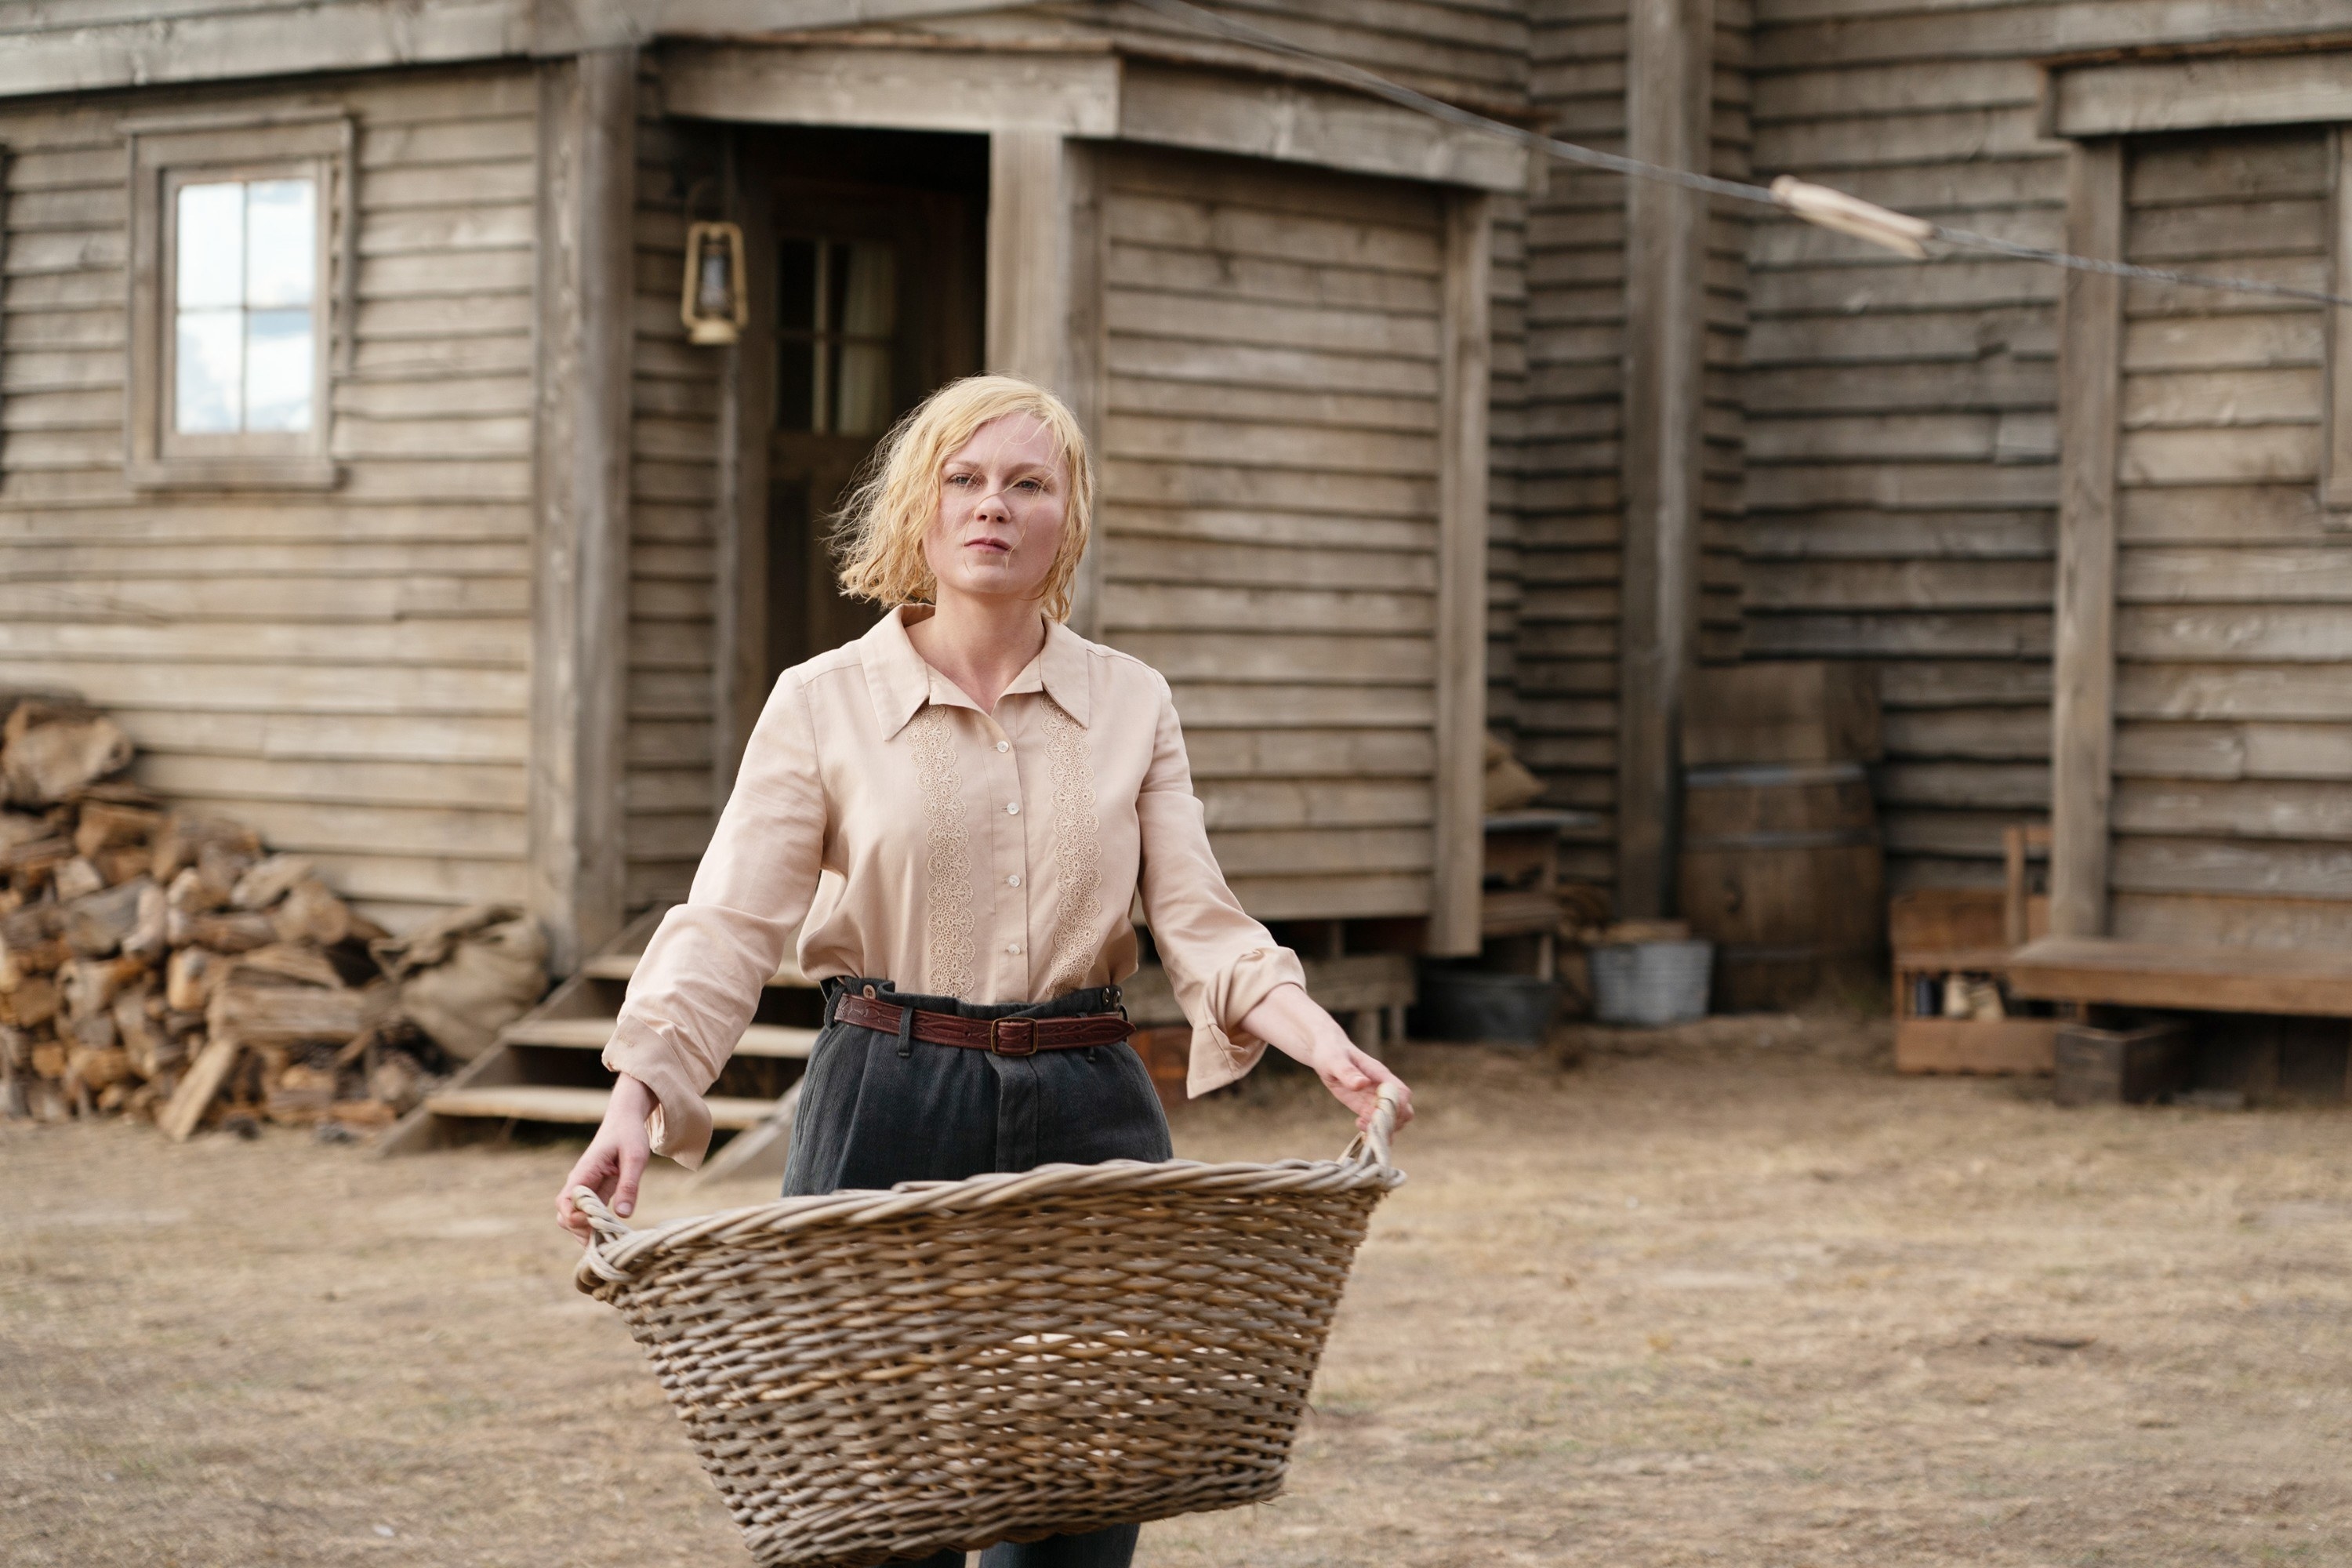 Kirsten Dunst carries a laundry basket